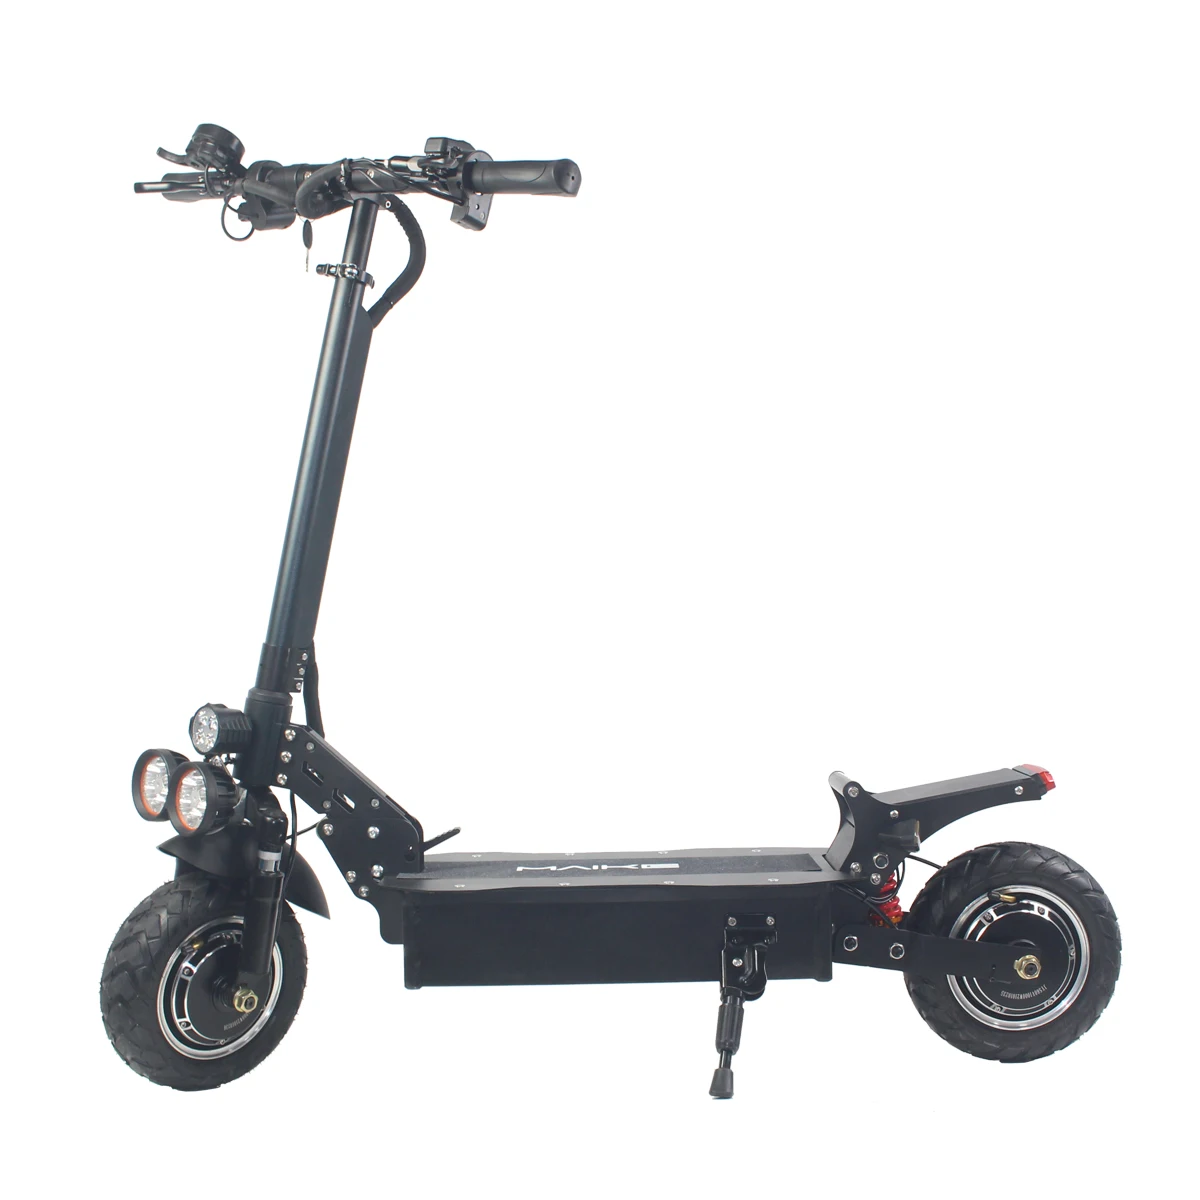 

China Wholesale dropship Maike Escoter mk6 10 inch Two Wheel 1000w 2000w double motor high speed electric scooter